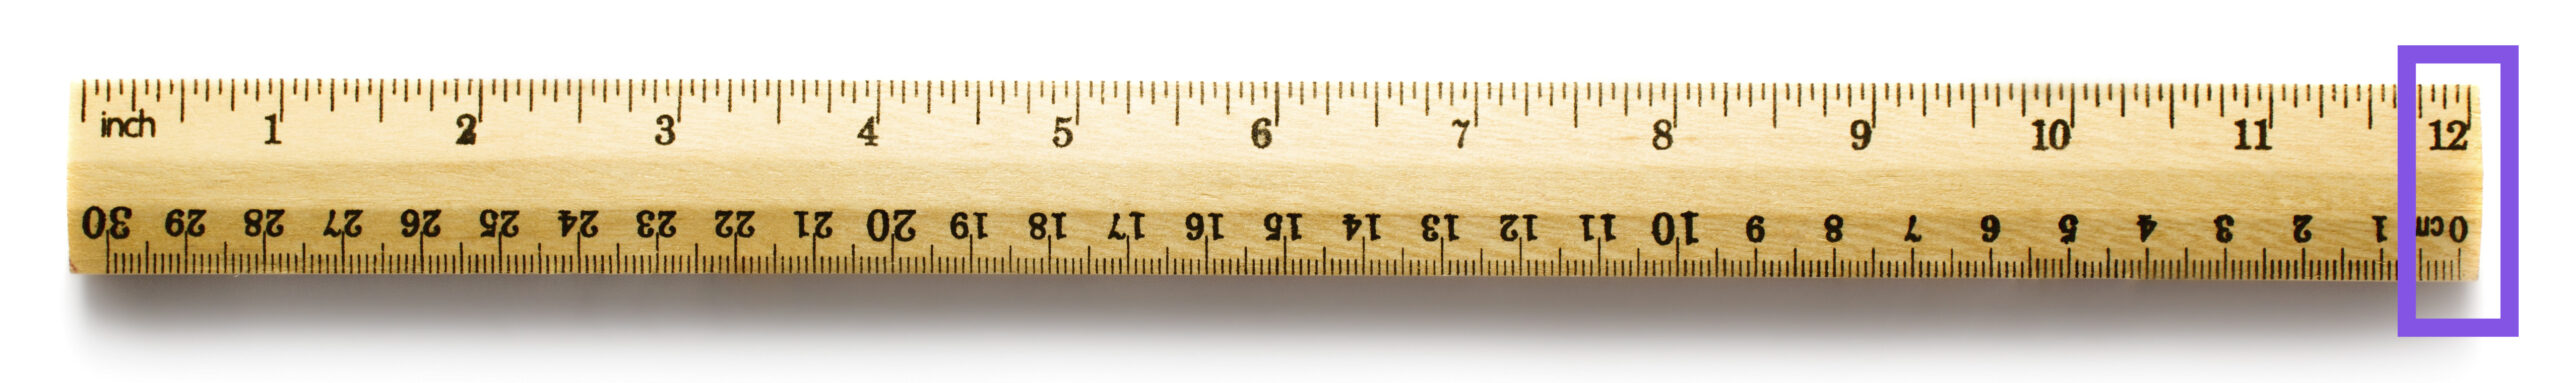 a ruler with 12 inches noted